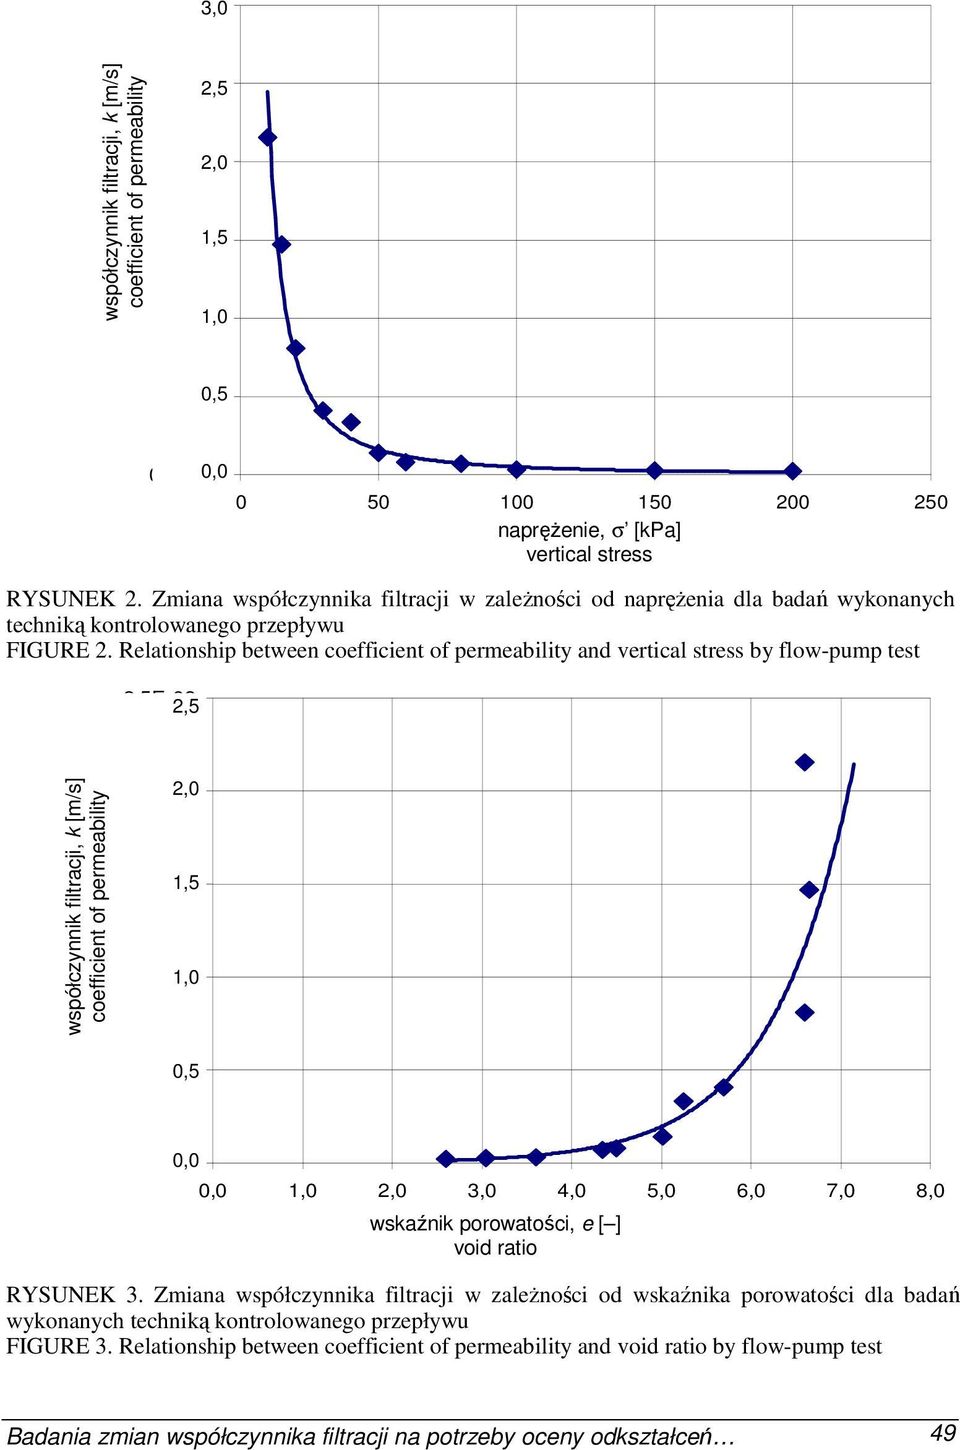 Relationship between coefficient of permeability and vertical stress by flow-pump test 2,5E-08 2,5 współczynnik filtracji, k [m/s] coefficient of permeability Współczynnik filtracji k [m/s] 2,0E-08